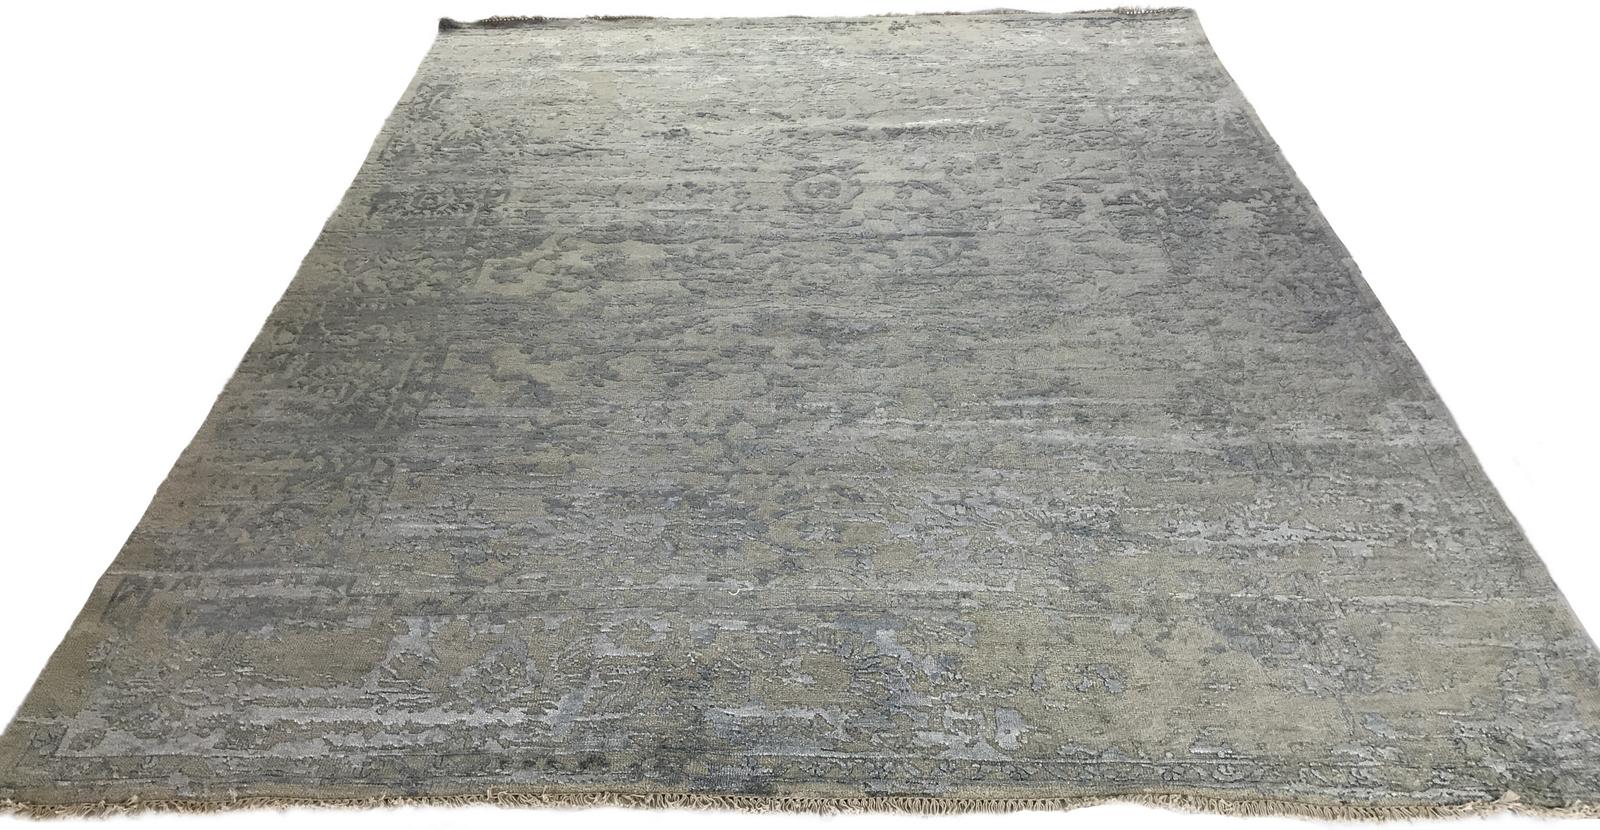 Traditional design meets contemporary colors in this vibrant wool area rug with beige and silver. The high low style creates both visual and tactile appeal, a rug that's lovely to look at and inviting to the touch! Made in India.